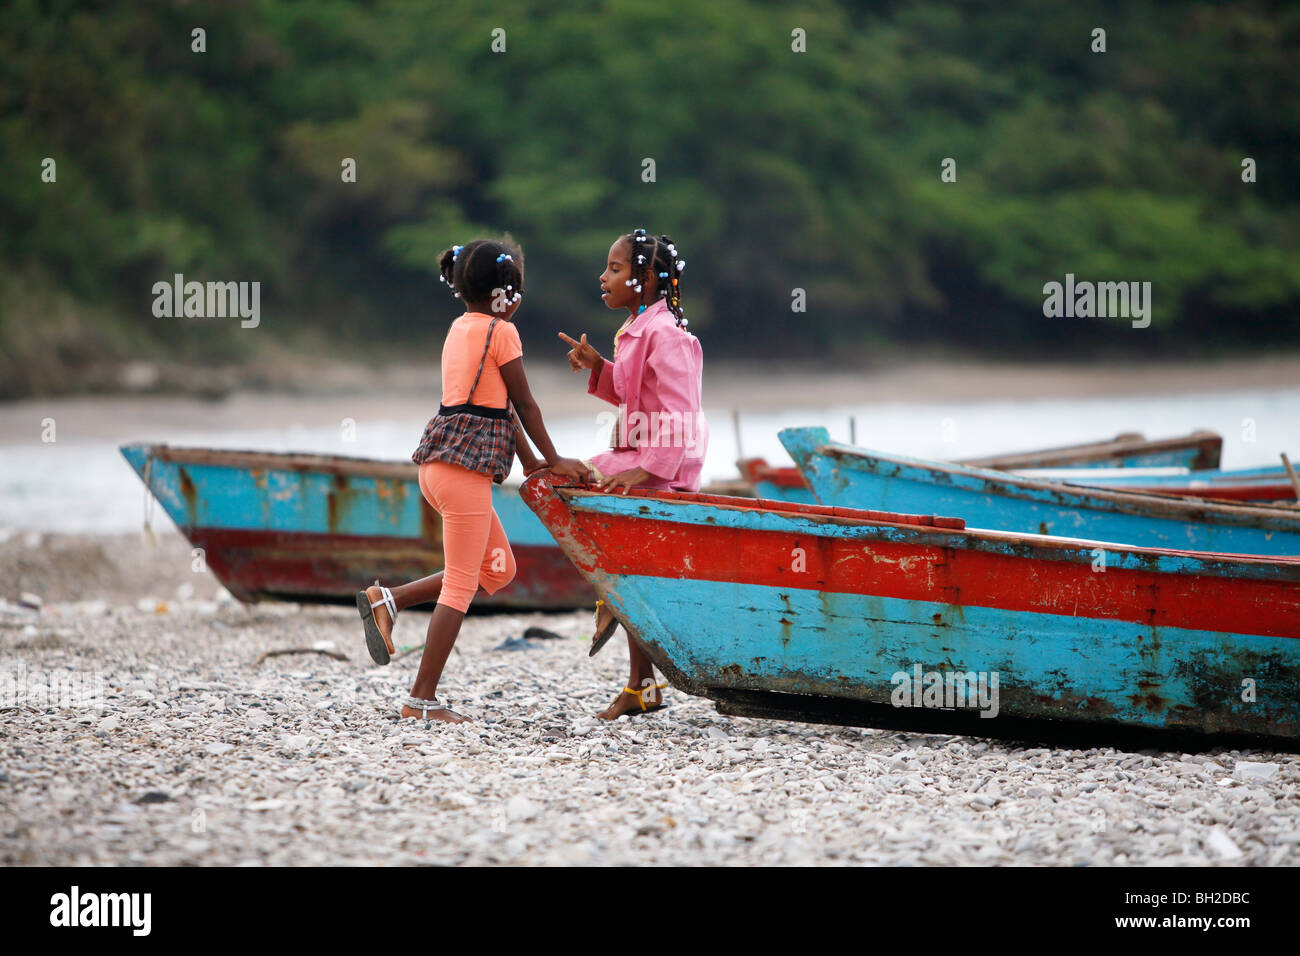 Two girls and wooden fishing boats, Bahoruco, Dominican Republic Stock Photo